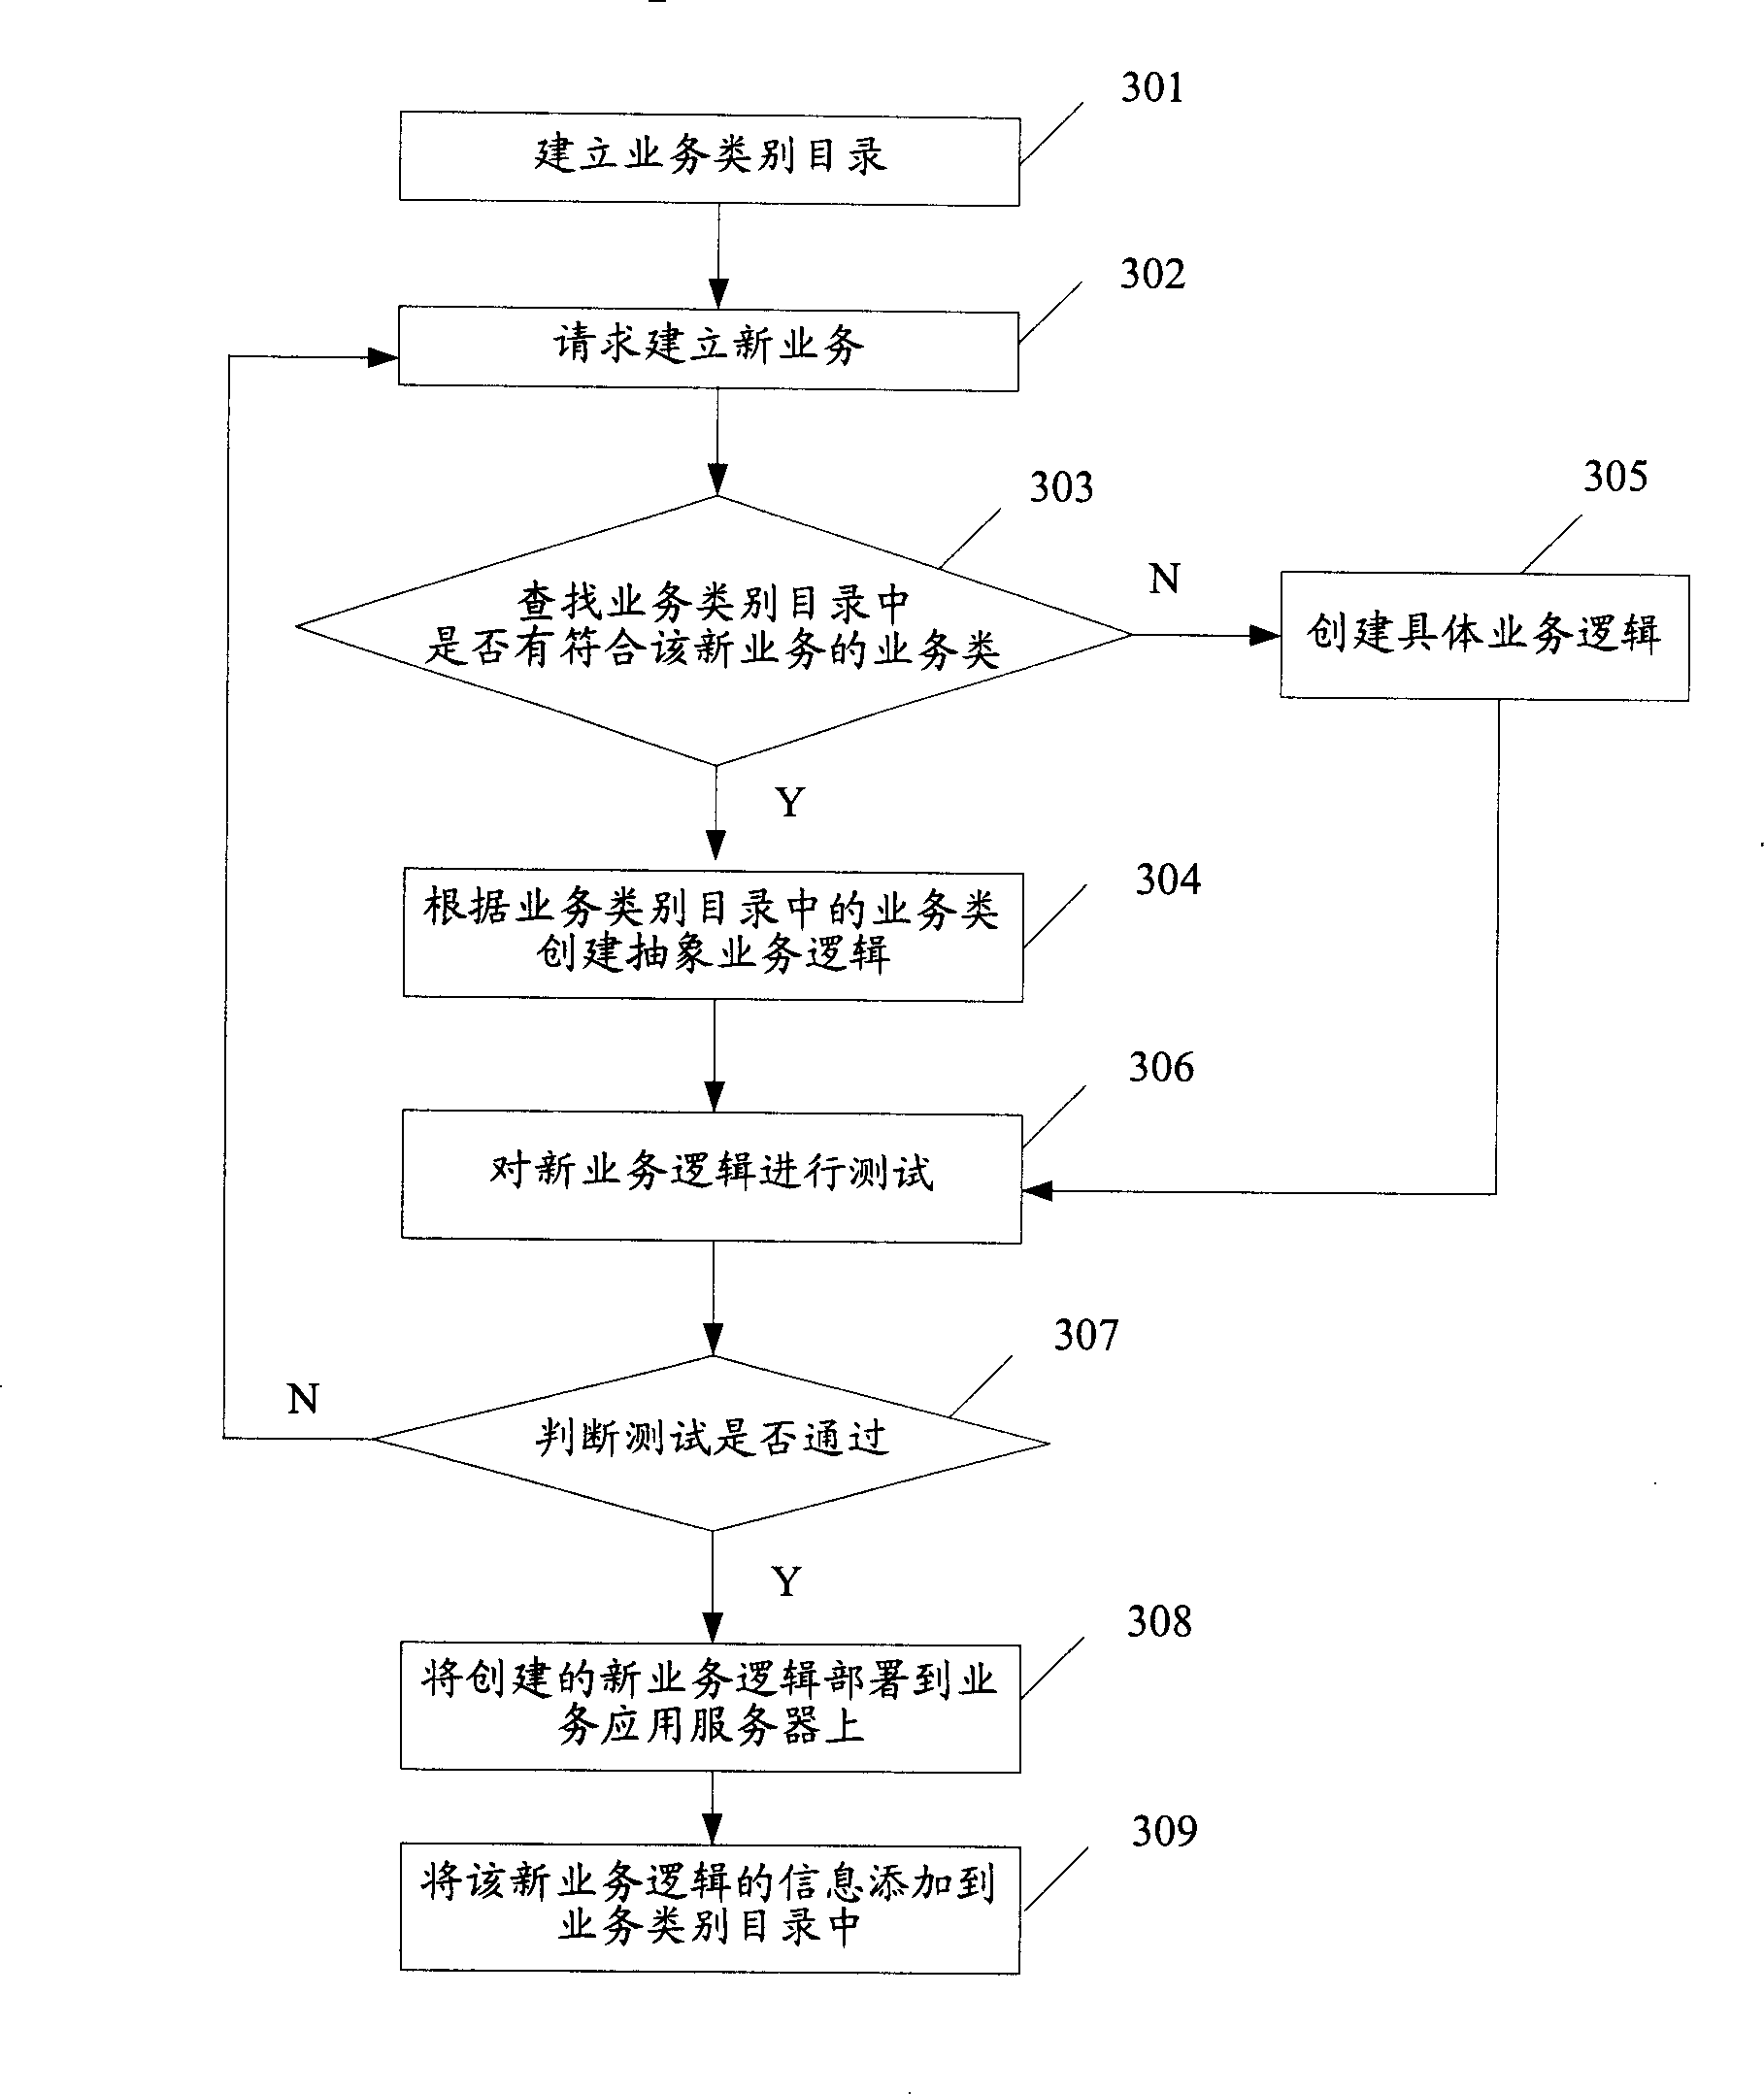 Service establishing, executing, mapping system and method